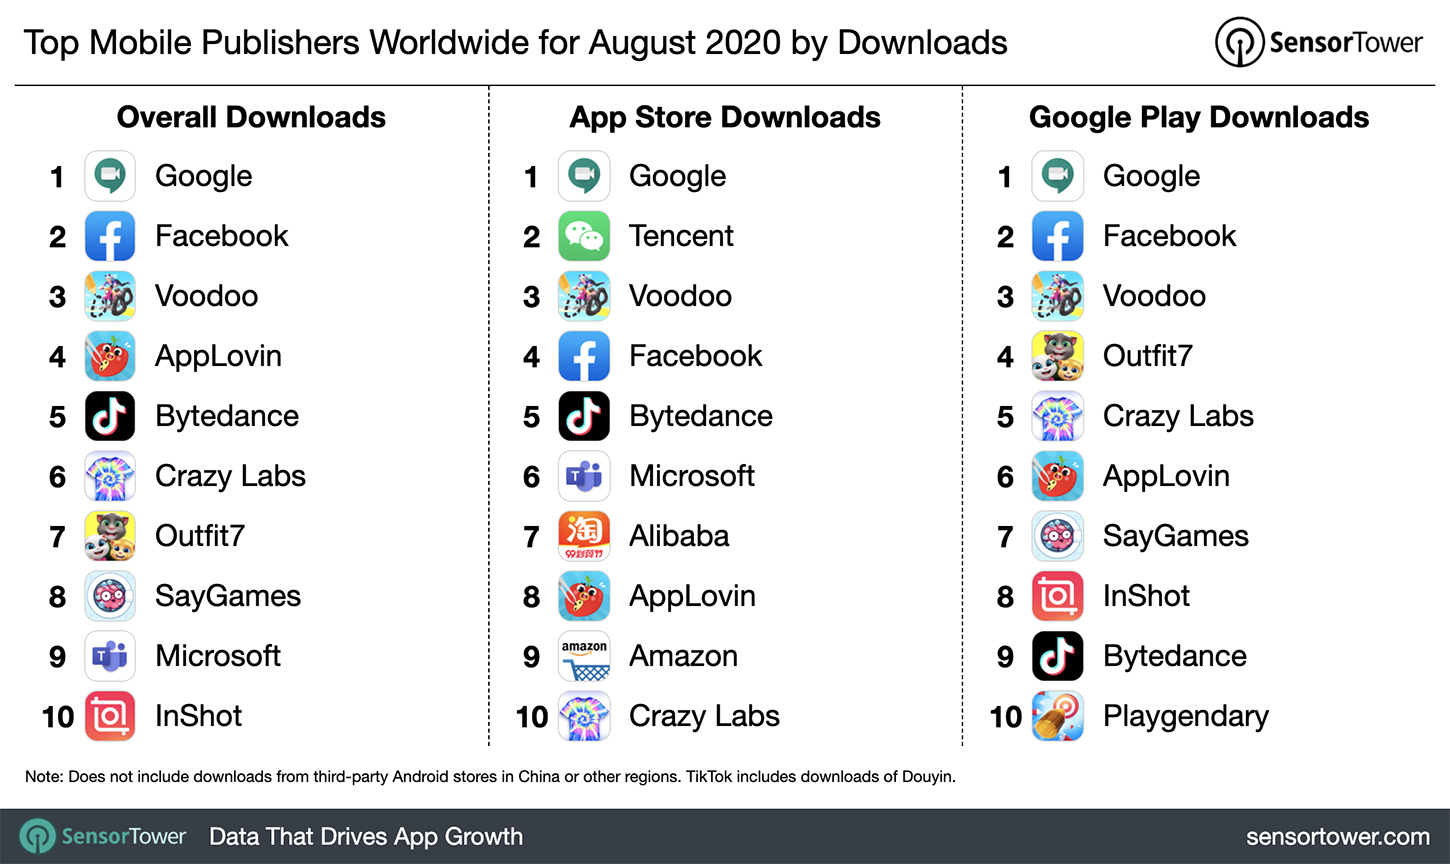 Top Mobile Publishers Worldwide for August 2020 by Downloads